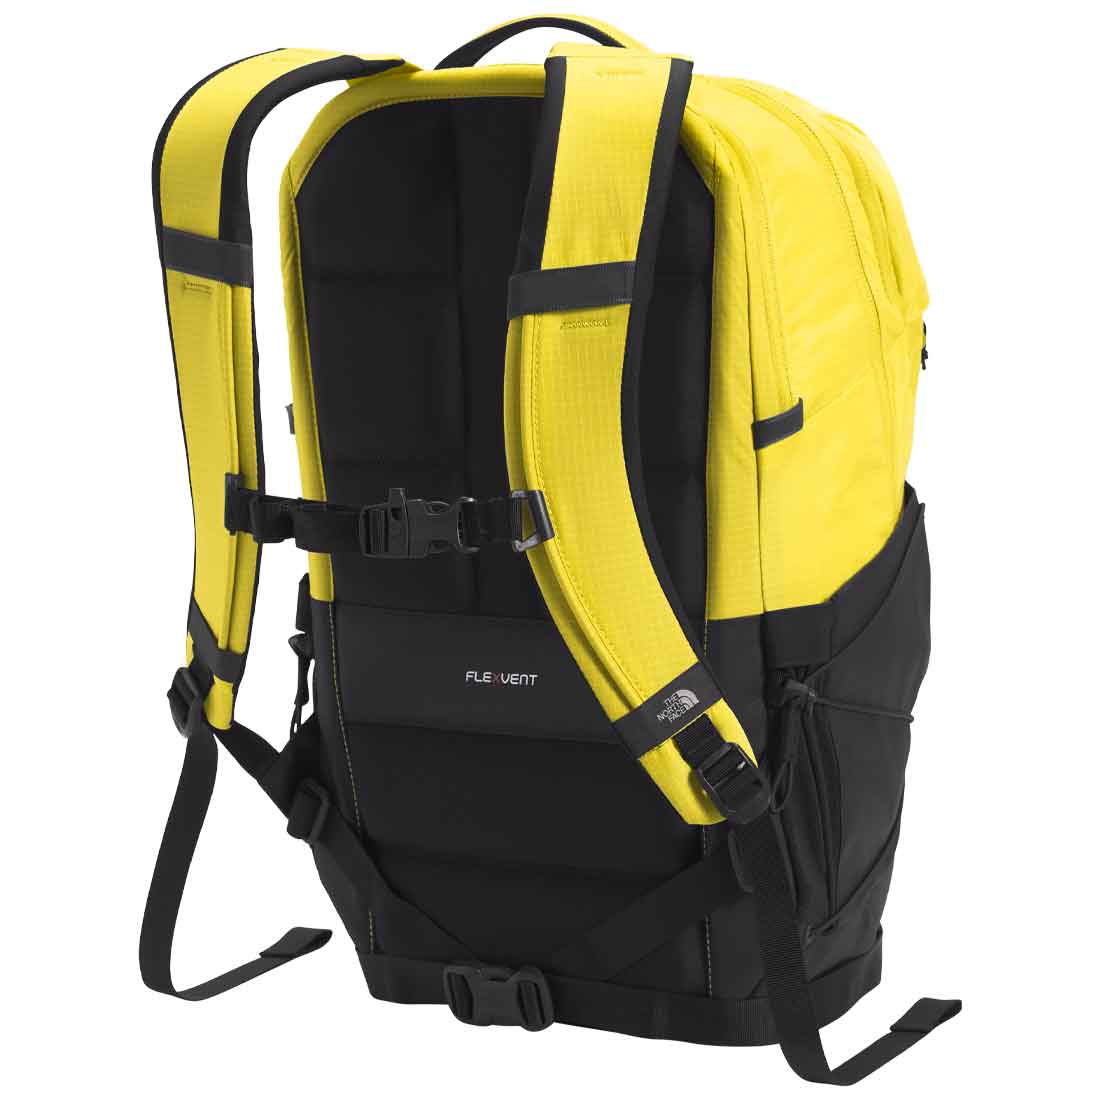 The North Face Borealis Backpack - Men's